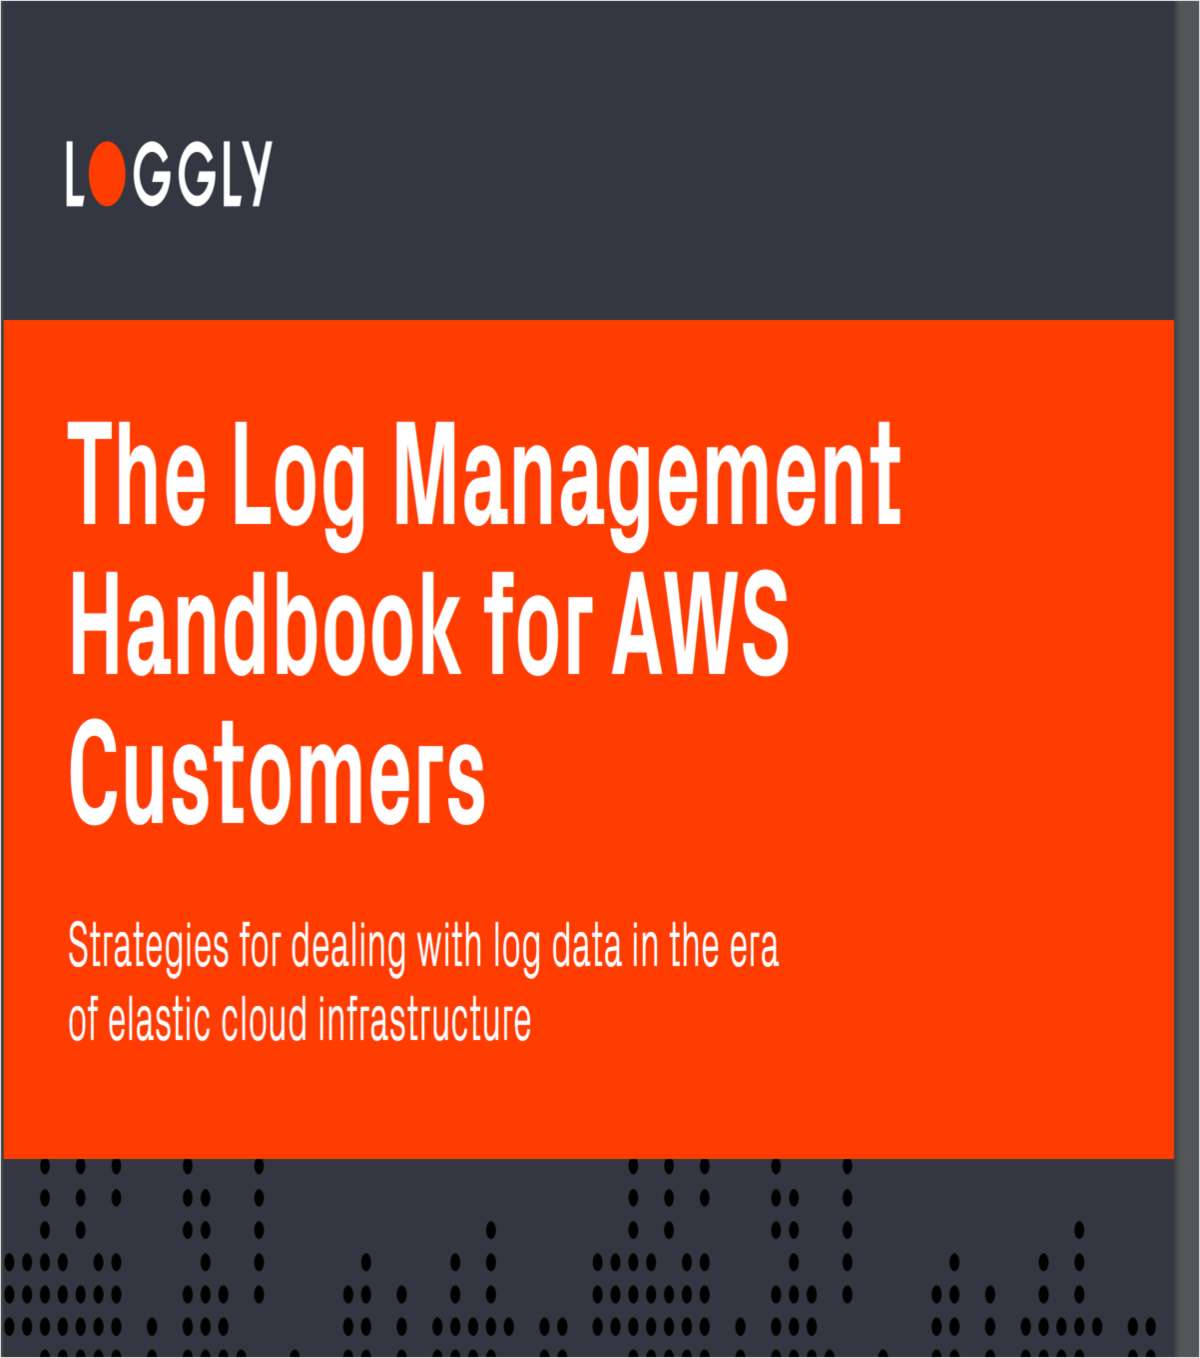 Free eBook: How to Mitigate Downtime and Errors in AWS Using Loggly